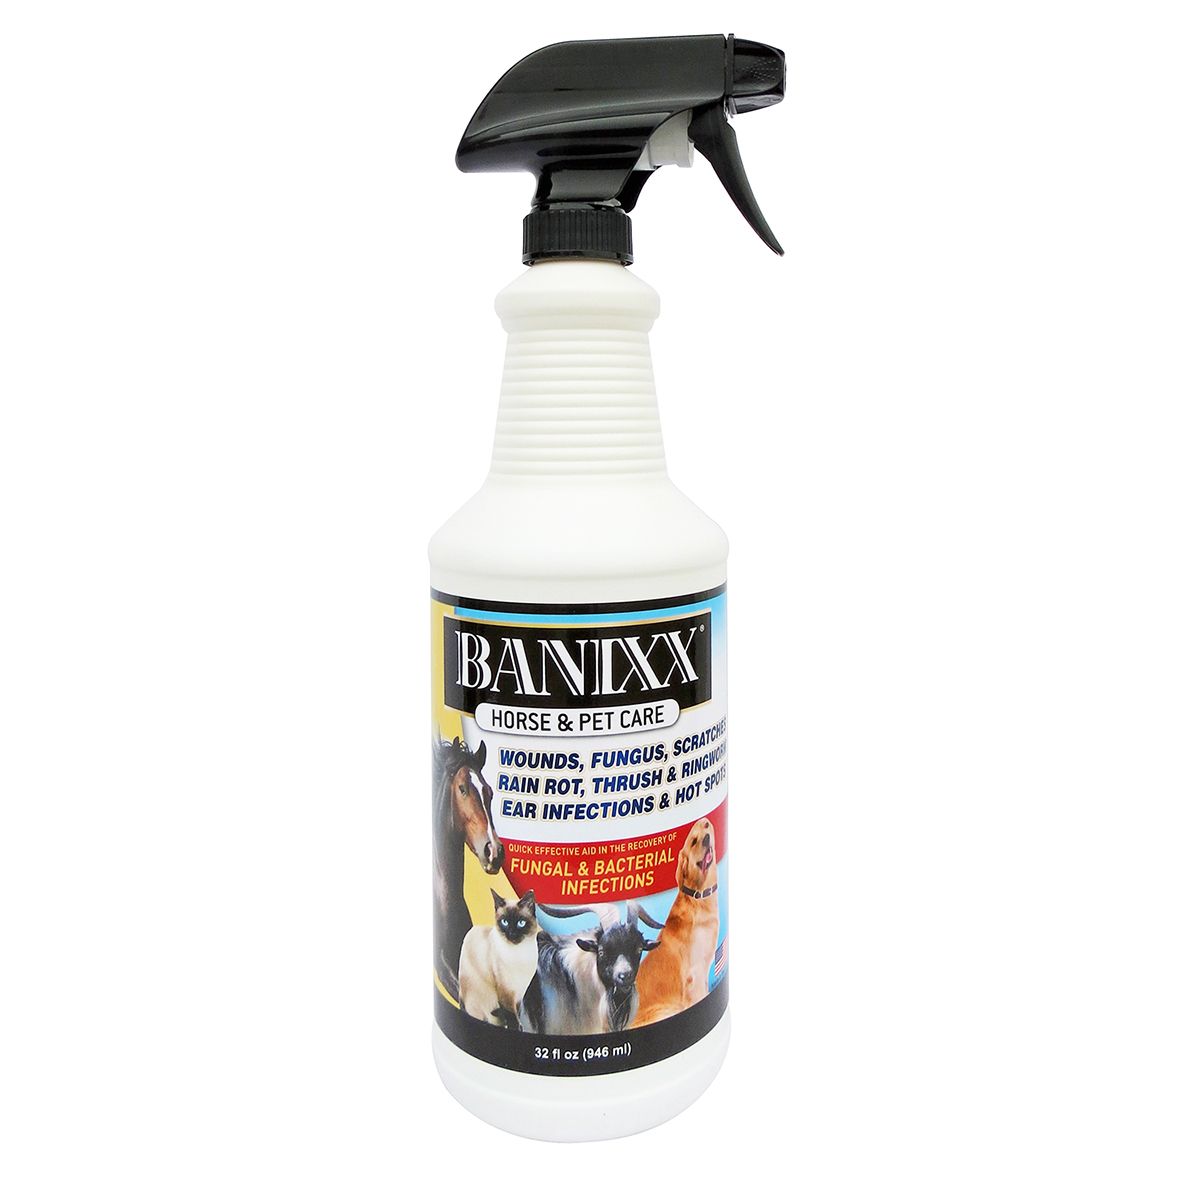 Banixx Horse & Pet Care for Fungal & Bacterial Infections 32 oz.